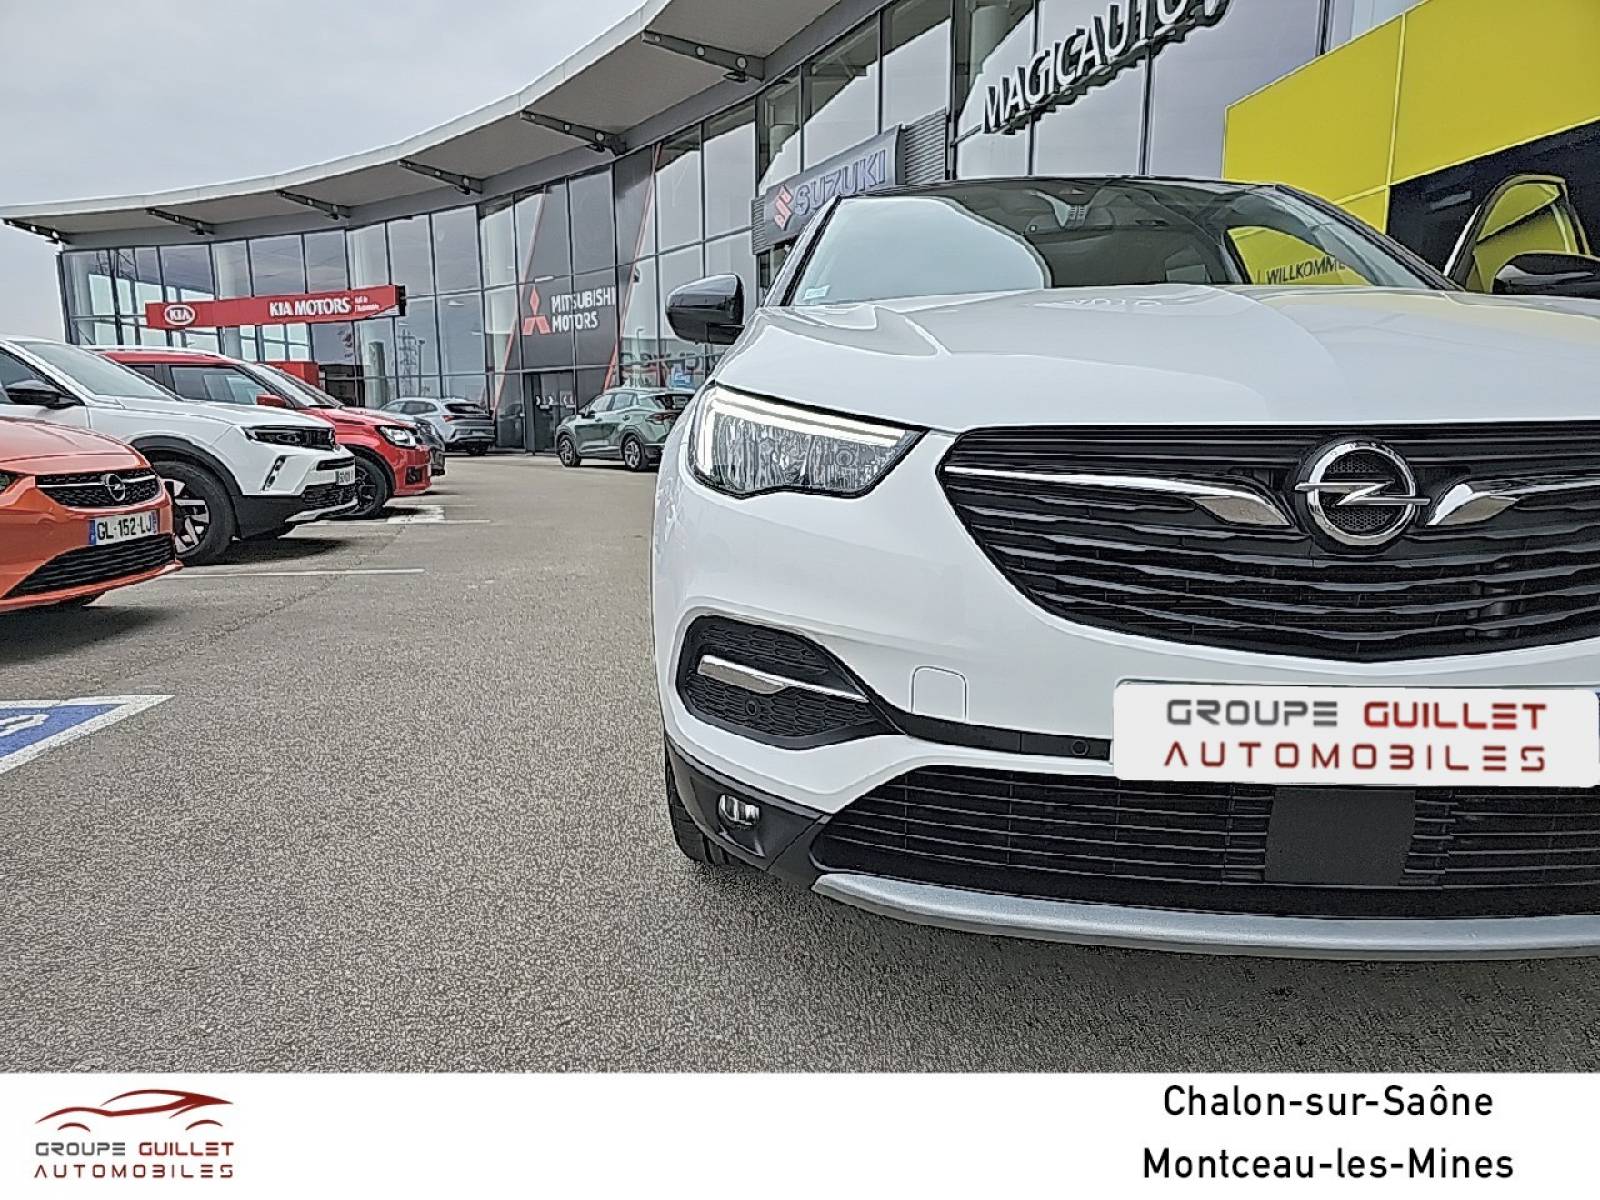 OPEL Grandland X 1.2 Turbo 130 ch - véhicule d'occasion - Groupe Guillet - Opel Magicauto Chalon - 71380 - Saint-Marcel - 46